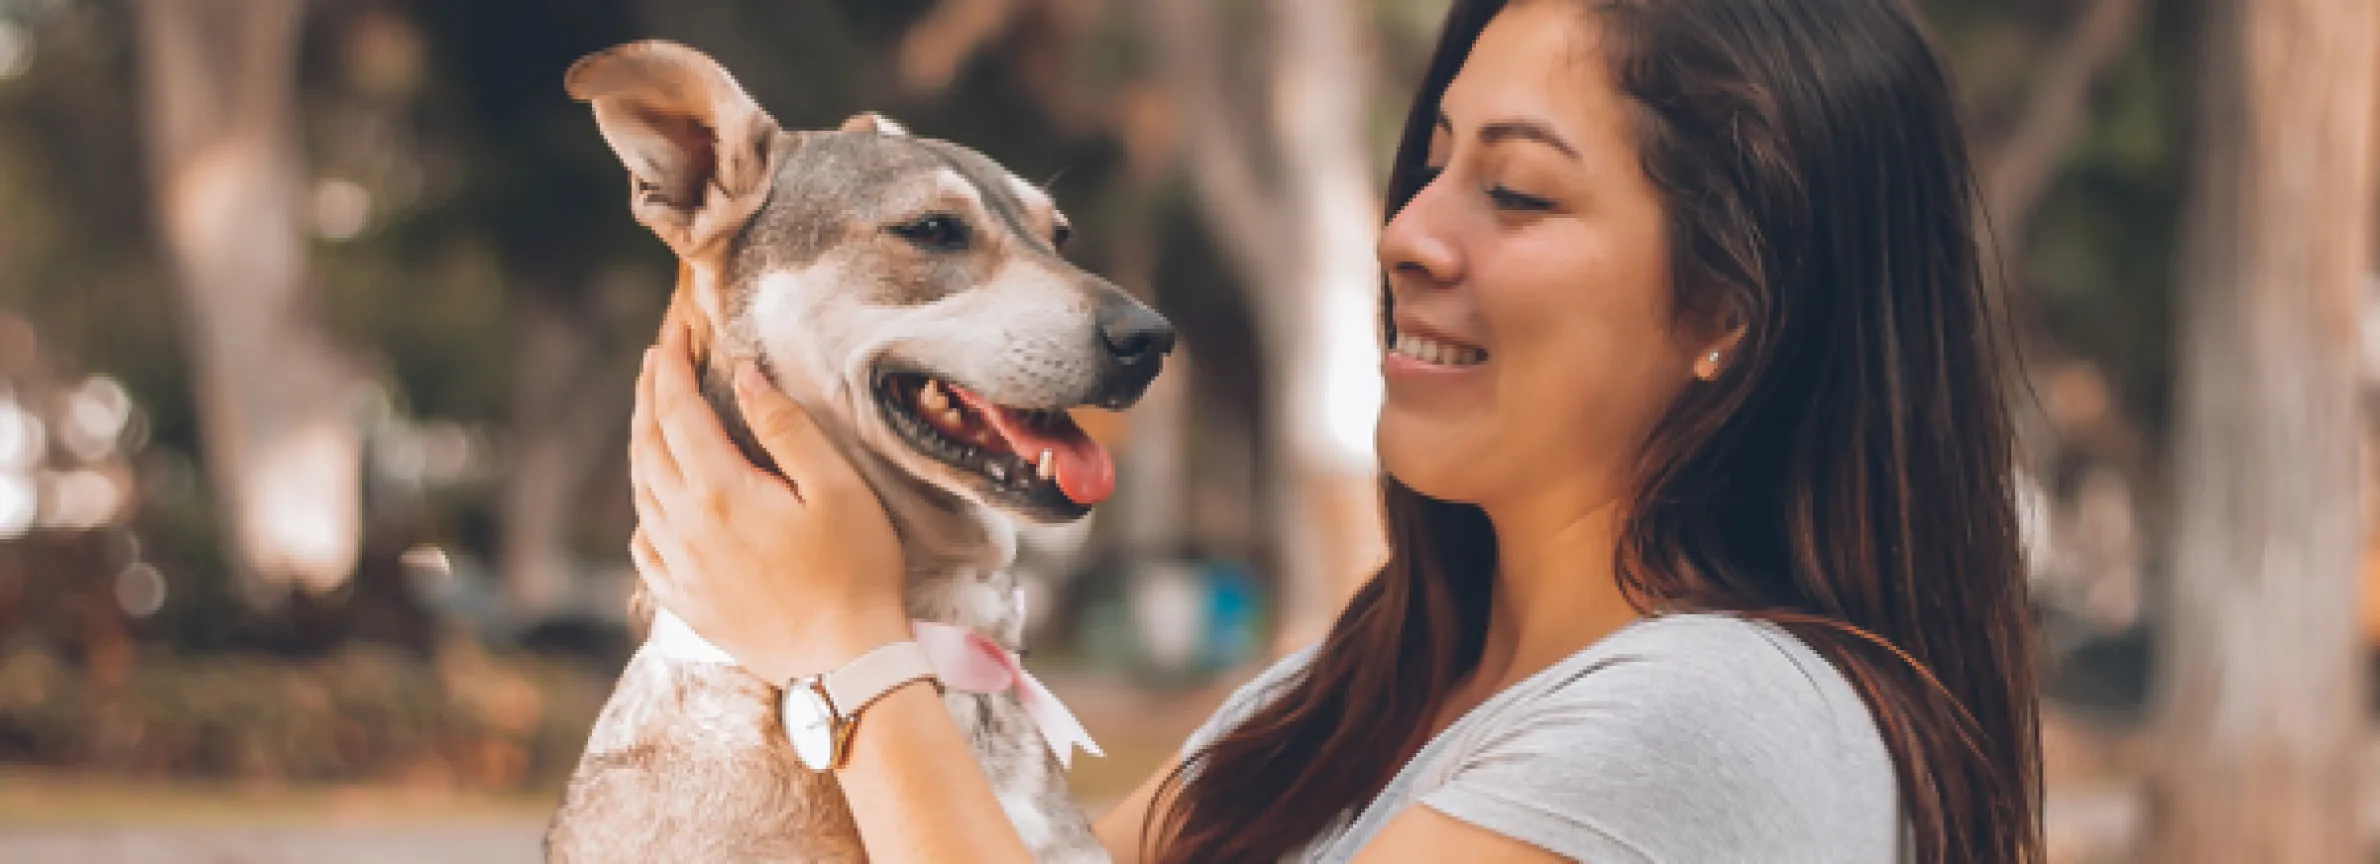 Dog with woman owner face to face smiling at each other